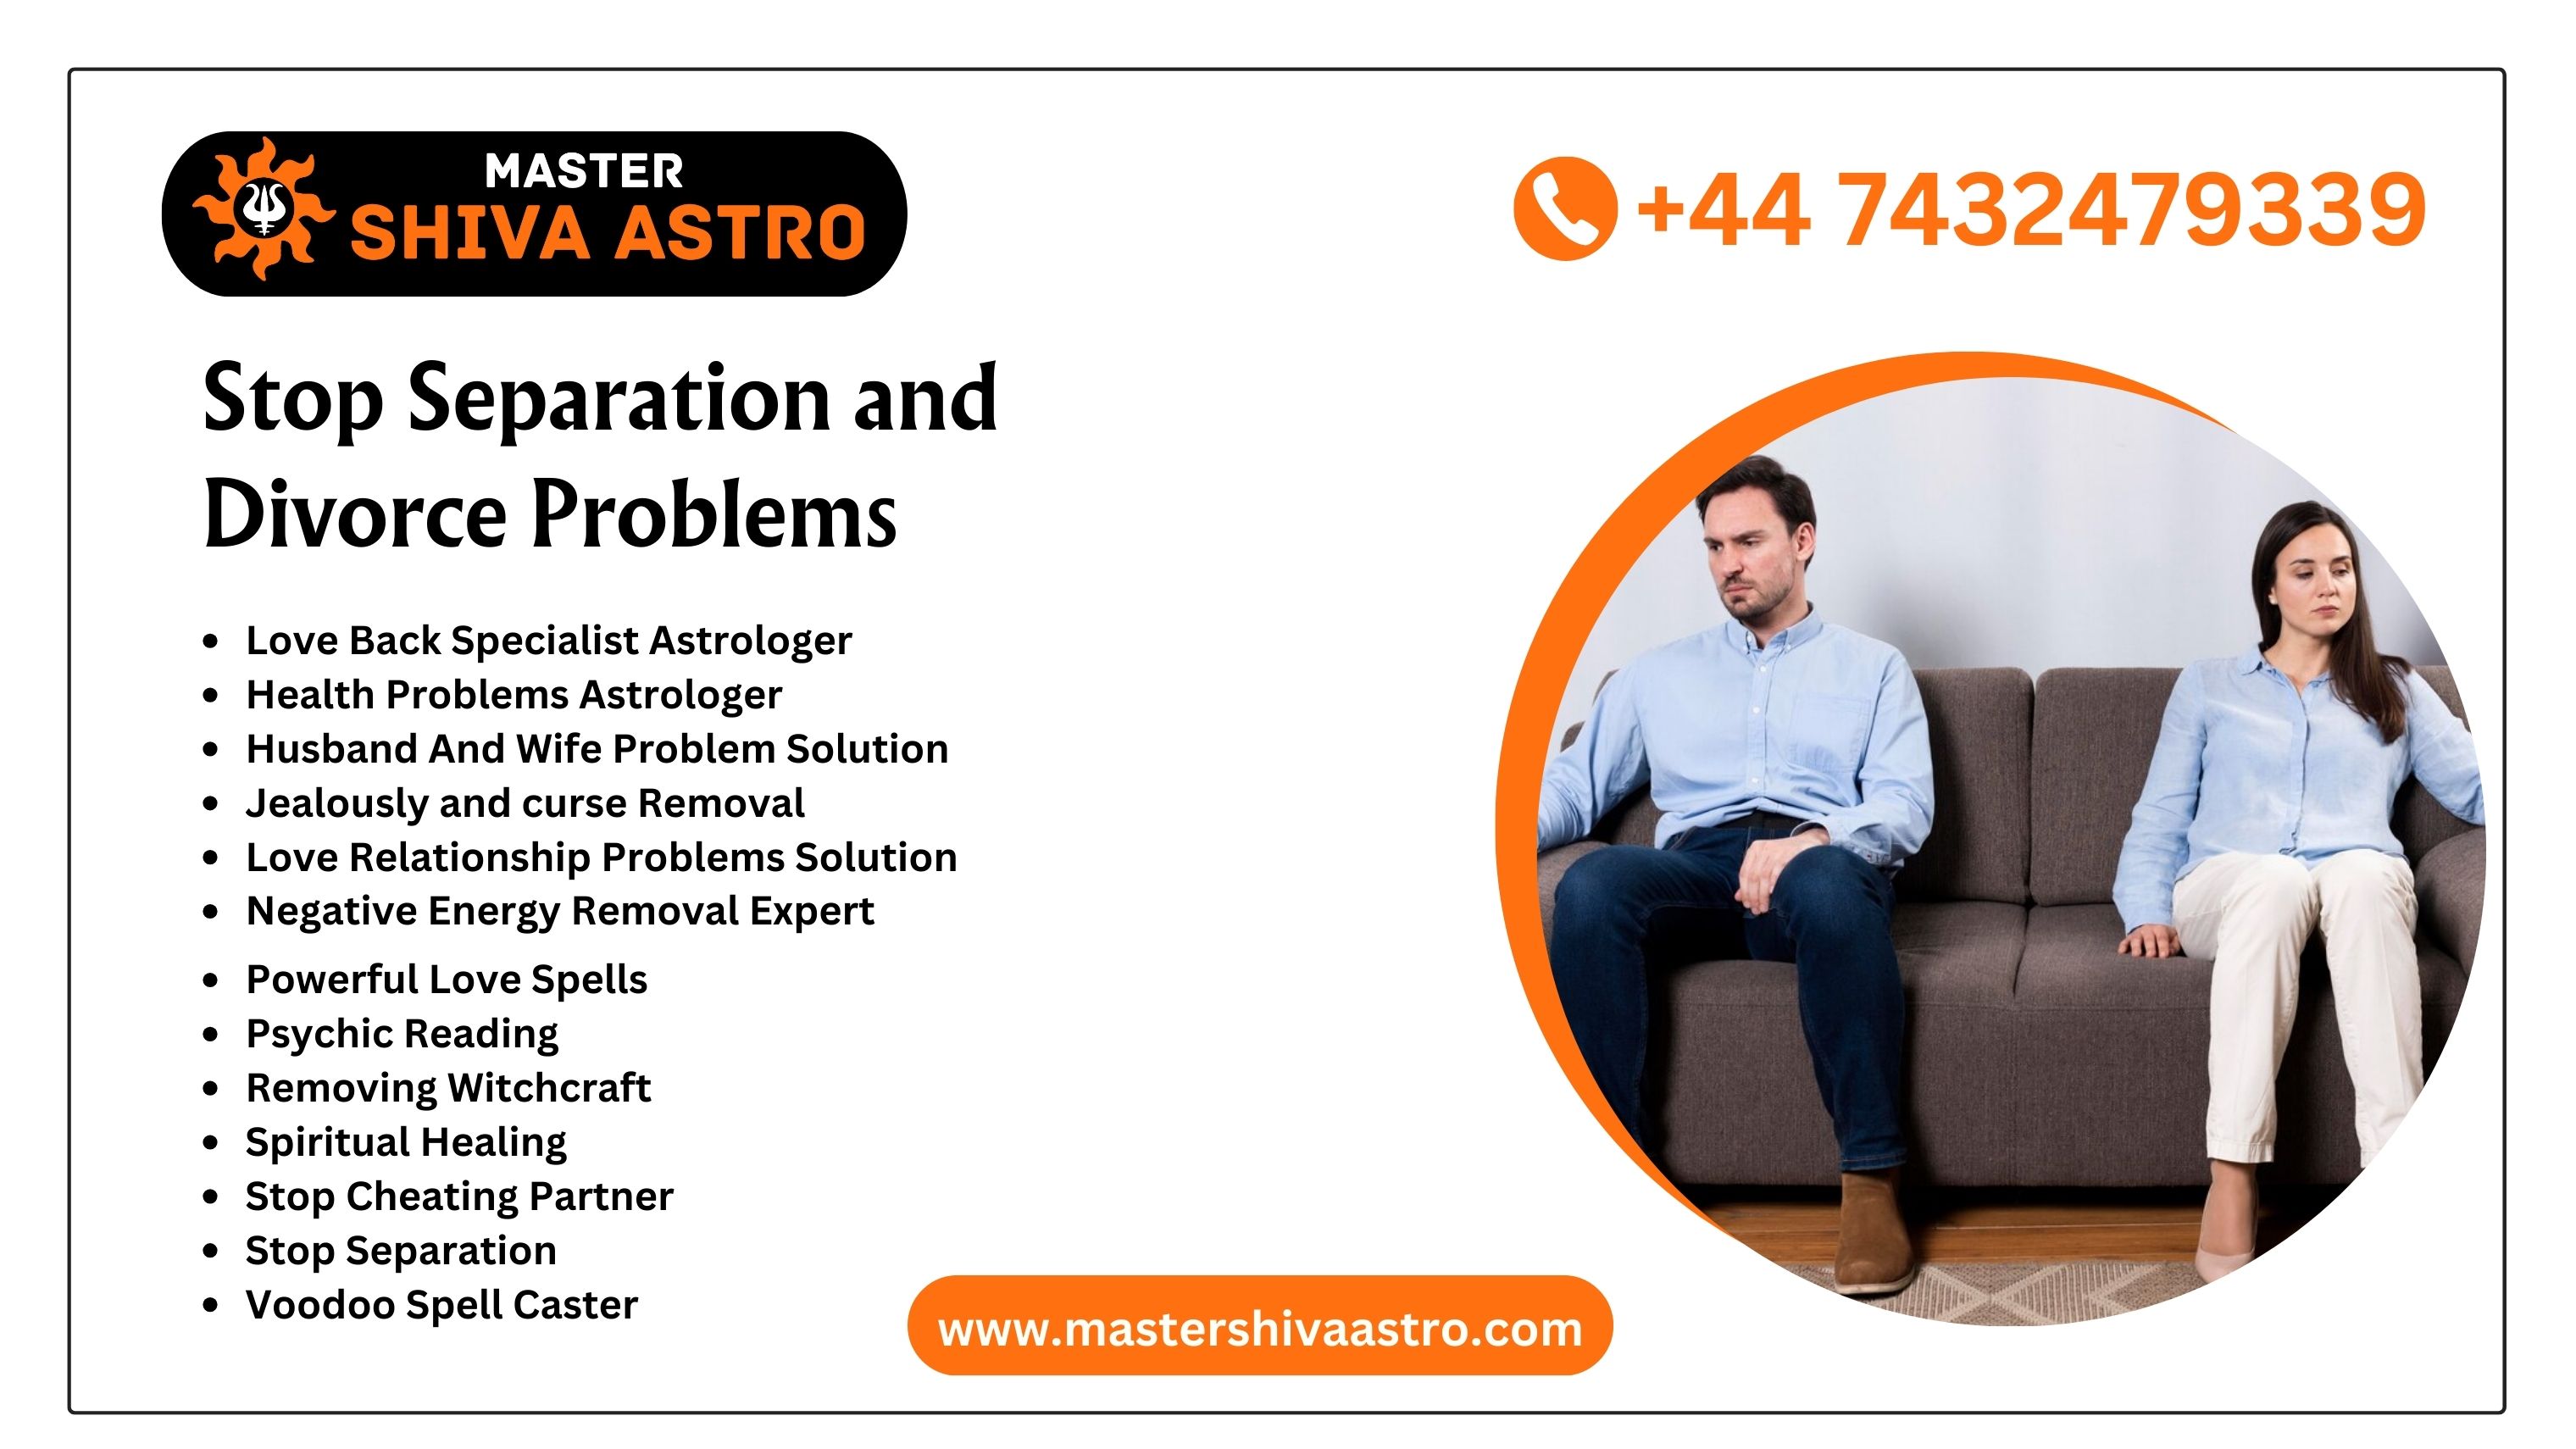 Stop Separation and Divorce Problems - Master Shiva